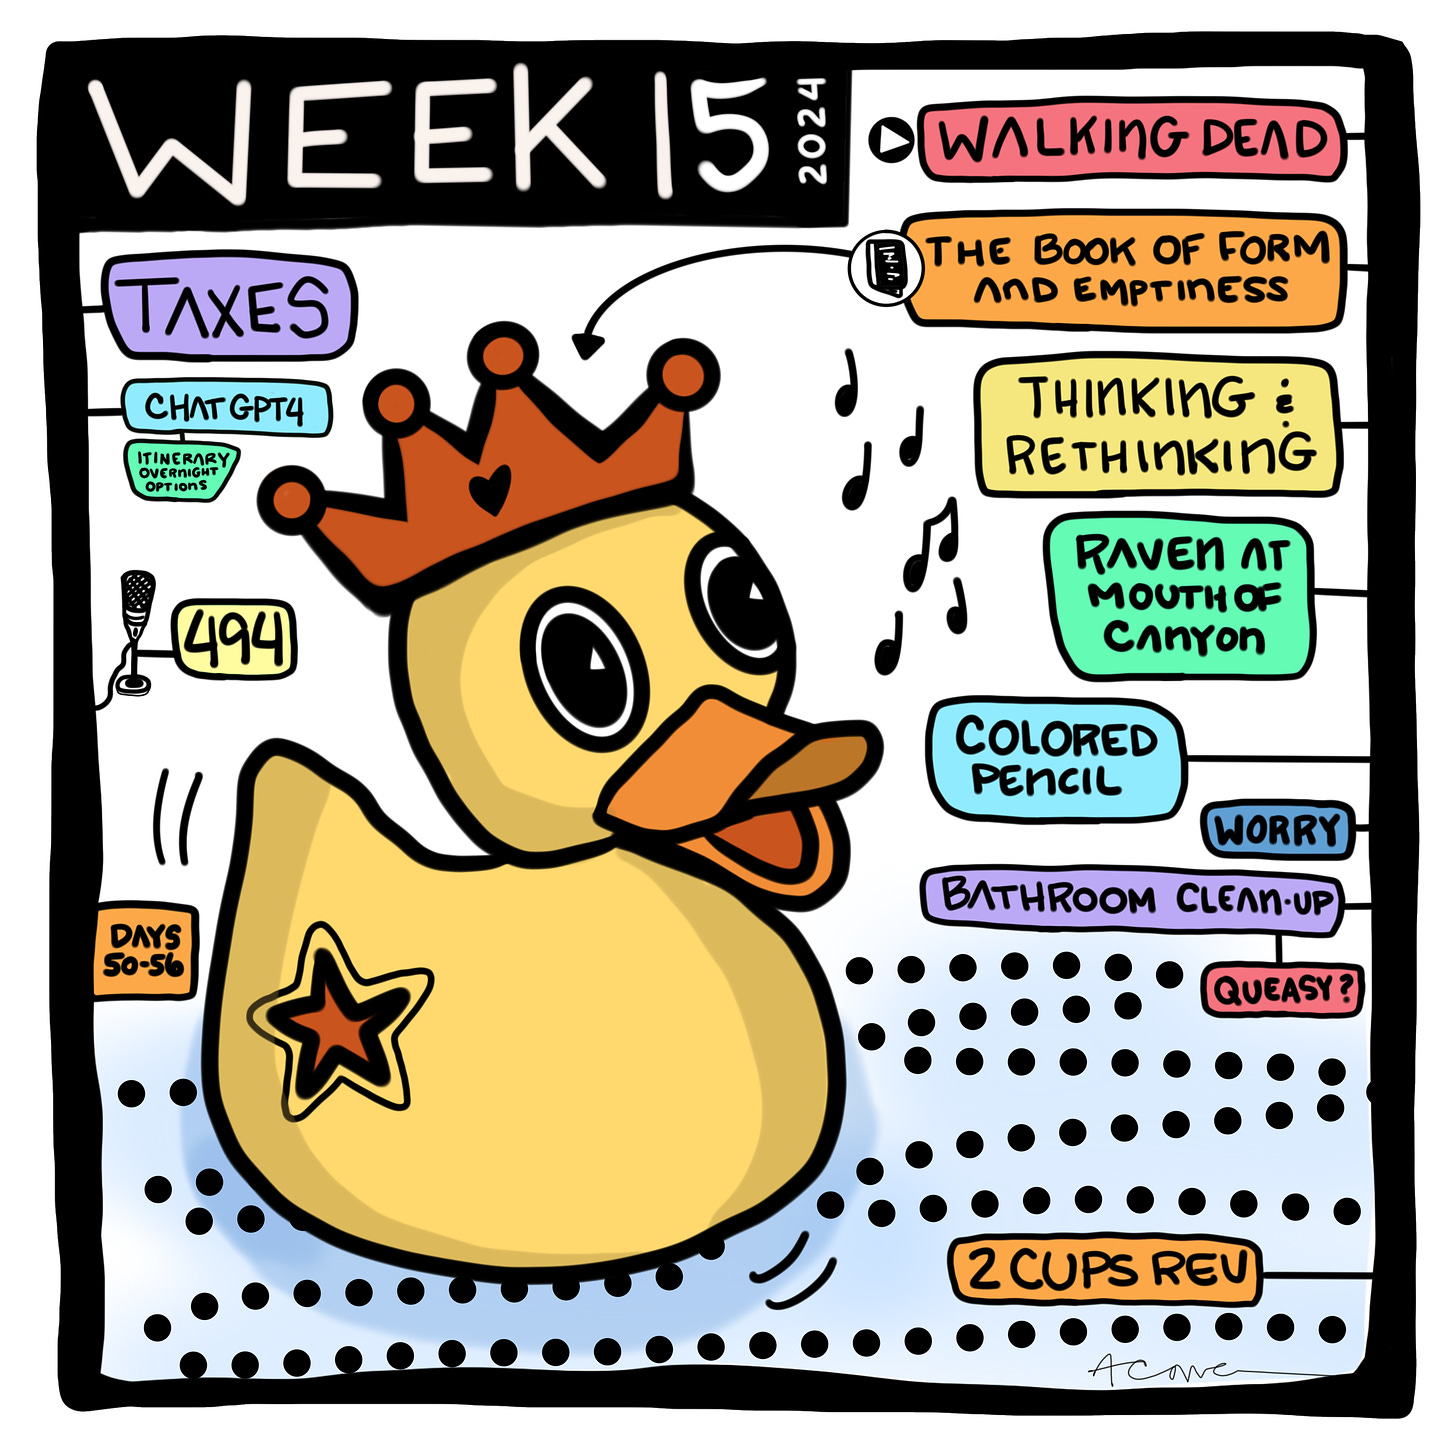 Week 15 list comic with duck image 